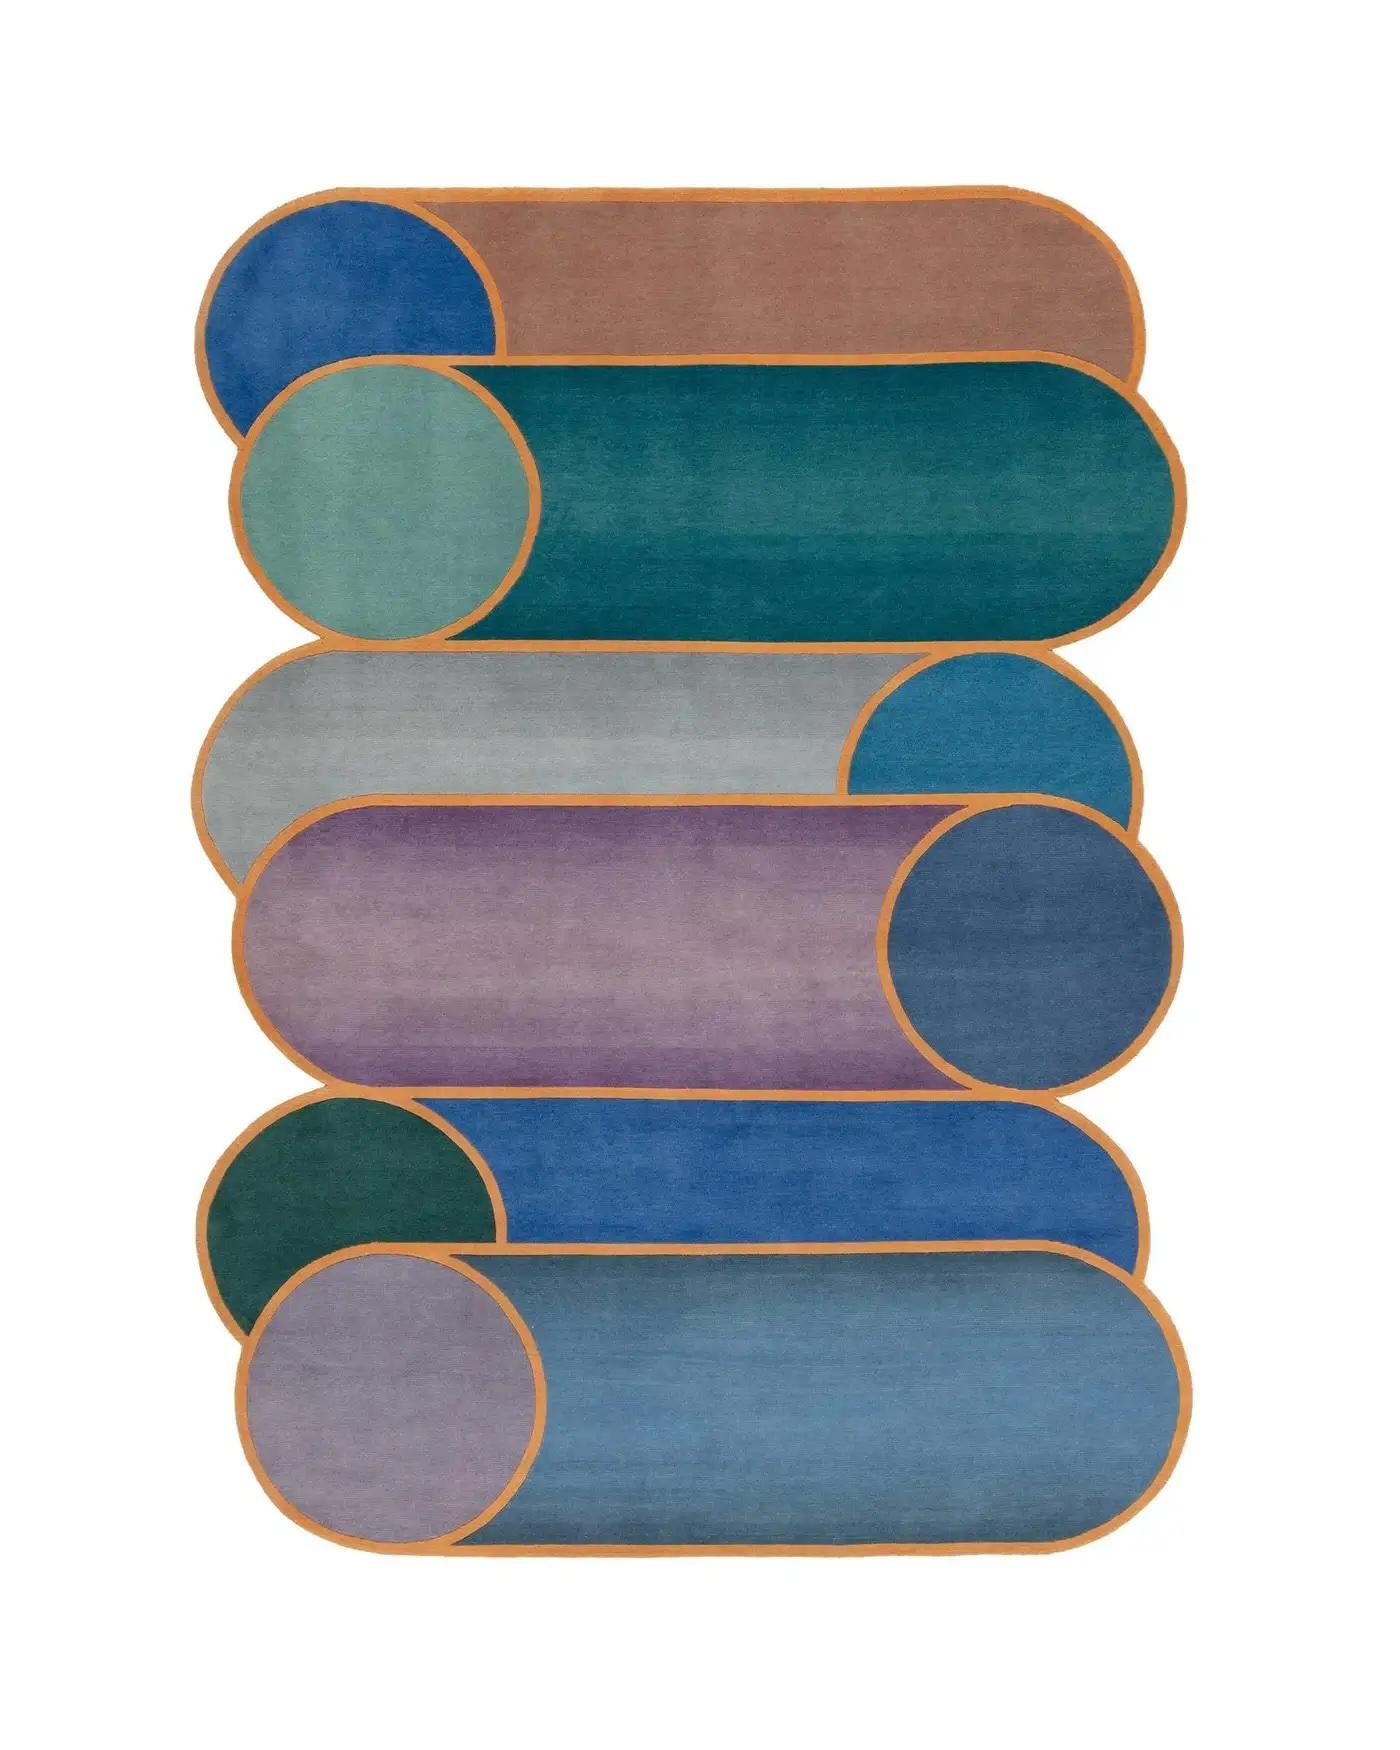 Rotazioni A
Proudly made by hand in Nepal
Designed by Patricia Urquiola
Designed by Patricia Urquiola, Rotazioni plays on the repetition of overlapping cylindrical forms that emphasize the circle as the matrix of the design. A scale of pastel colors